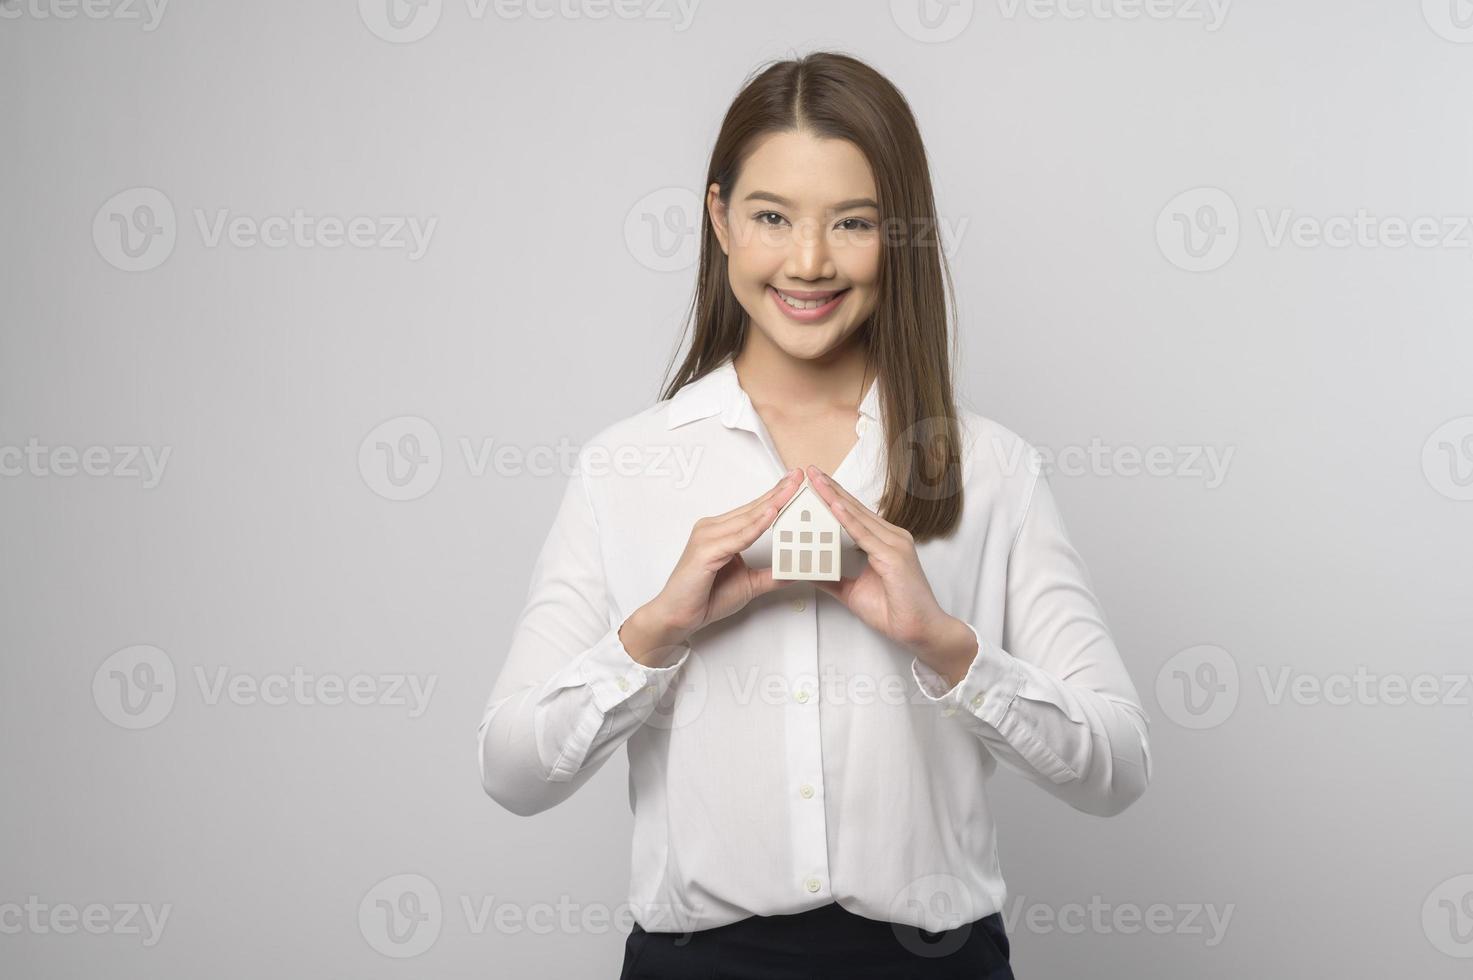 Young smiling woman holding small model house over white background studio photo